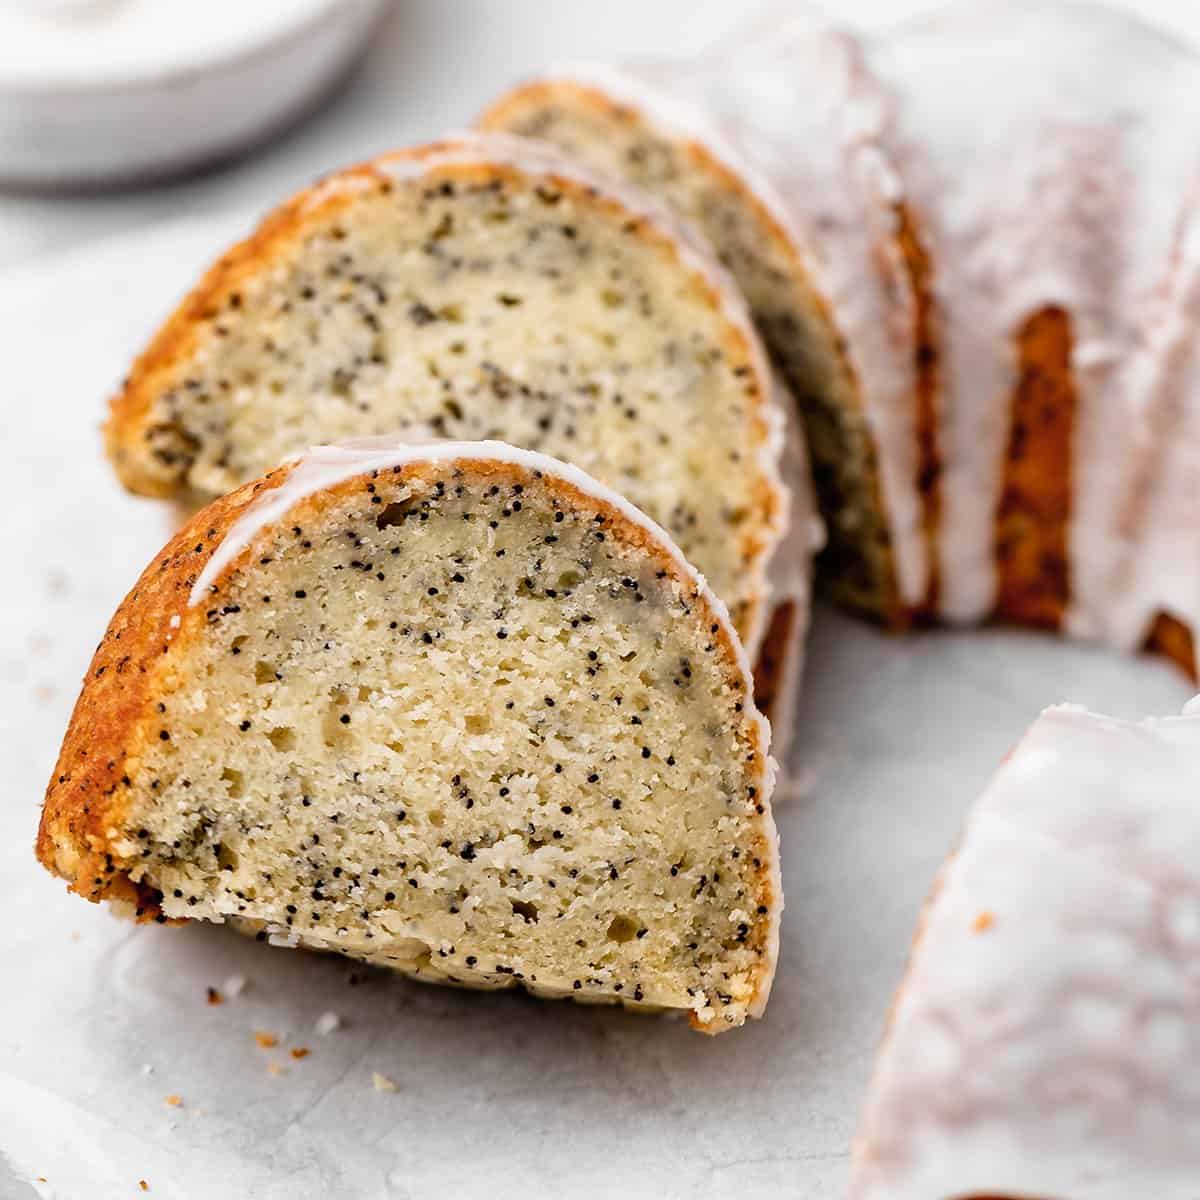 Lemon Poppy Seed Cake with 2 slices cut out of it